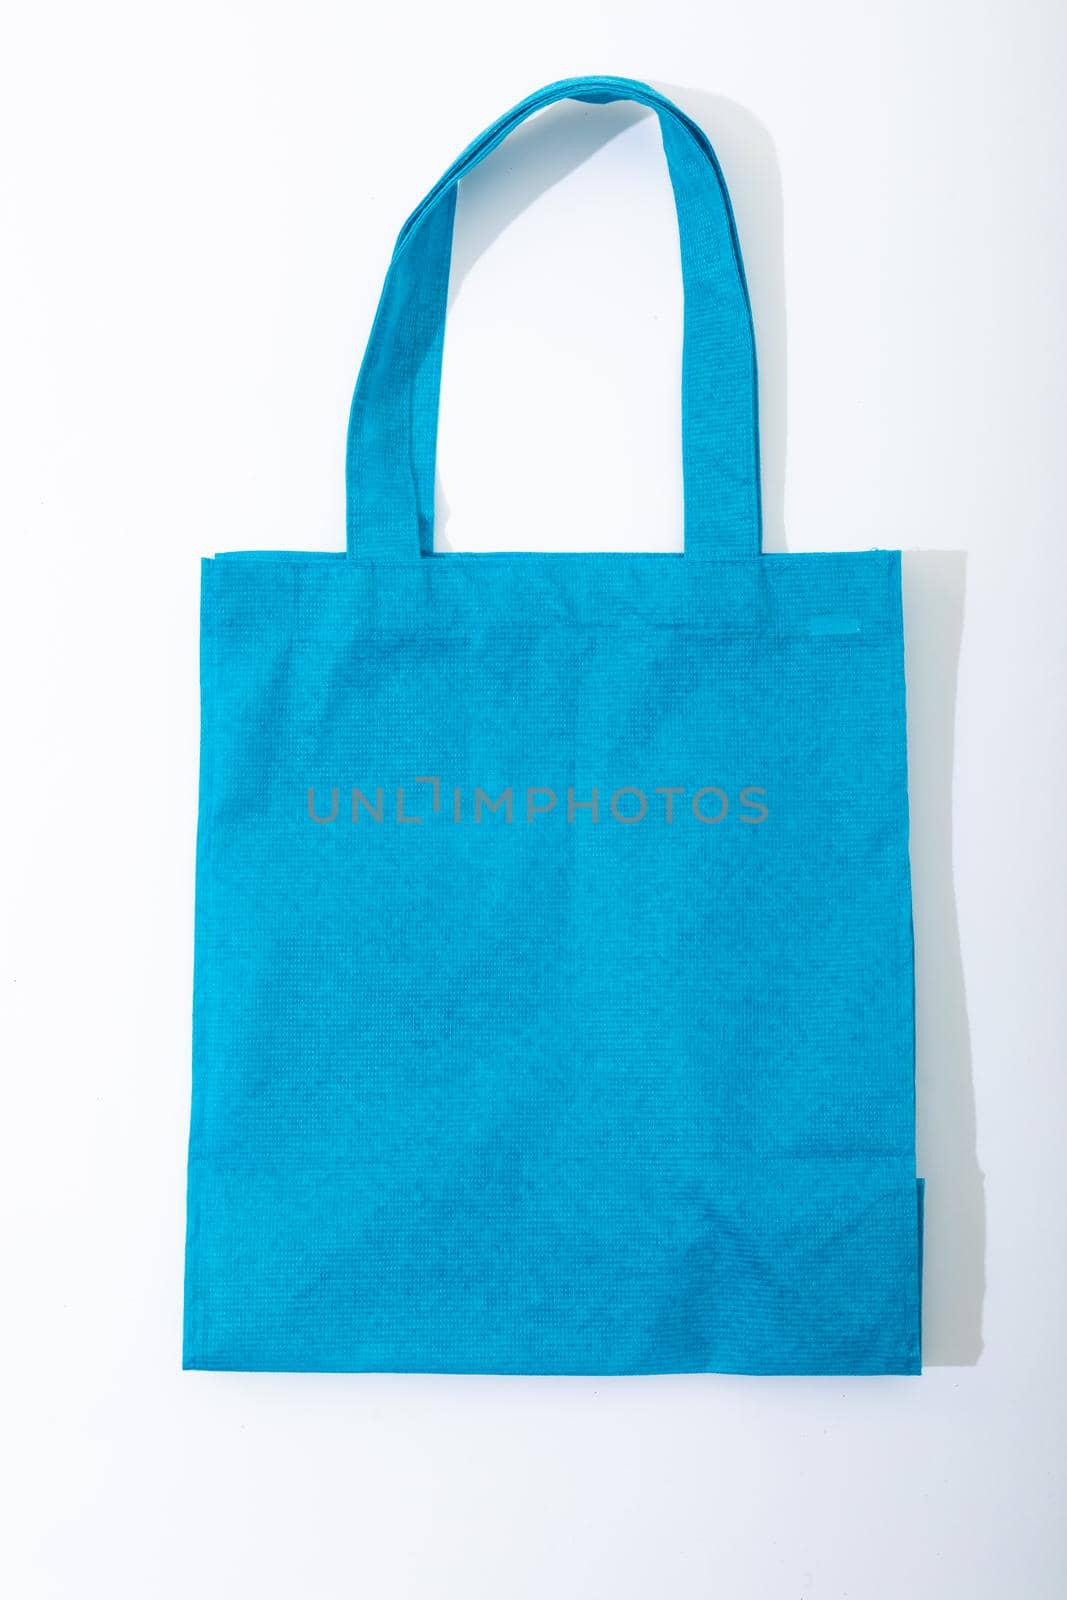 Composition of empty blue canvas shopping bag lying flat on white background by Wavebreakmedia